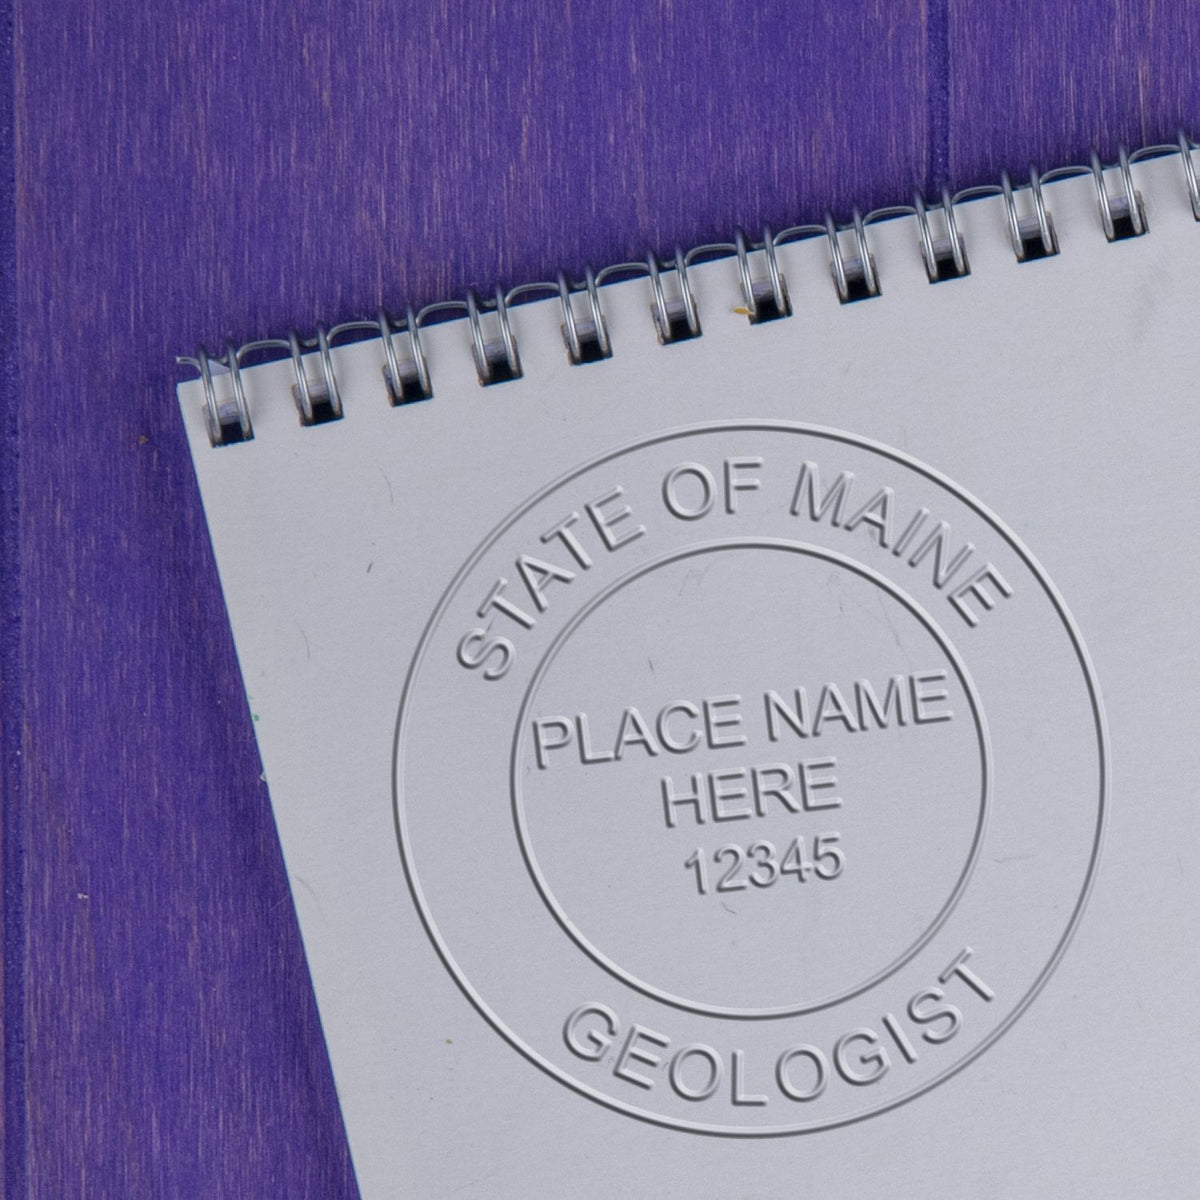 An alternative view of the State of Maine Extended Long Reach Geologist Seal stamped on a sheet of paper showing the image in use